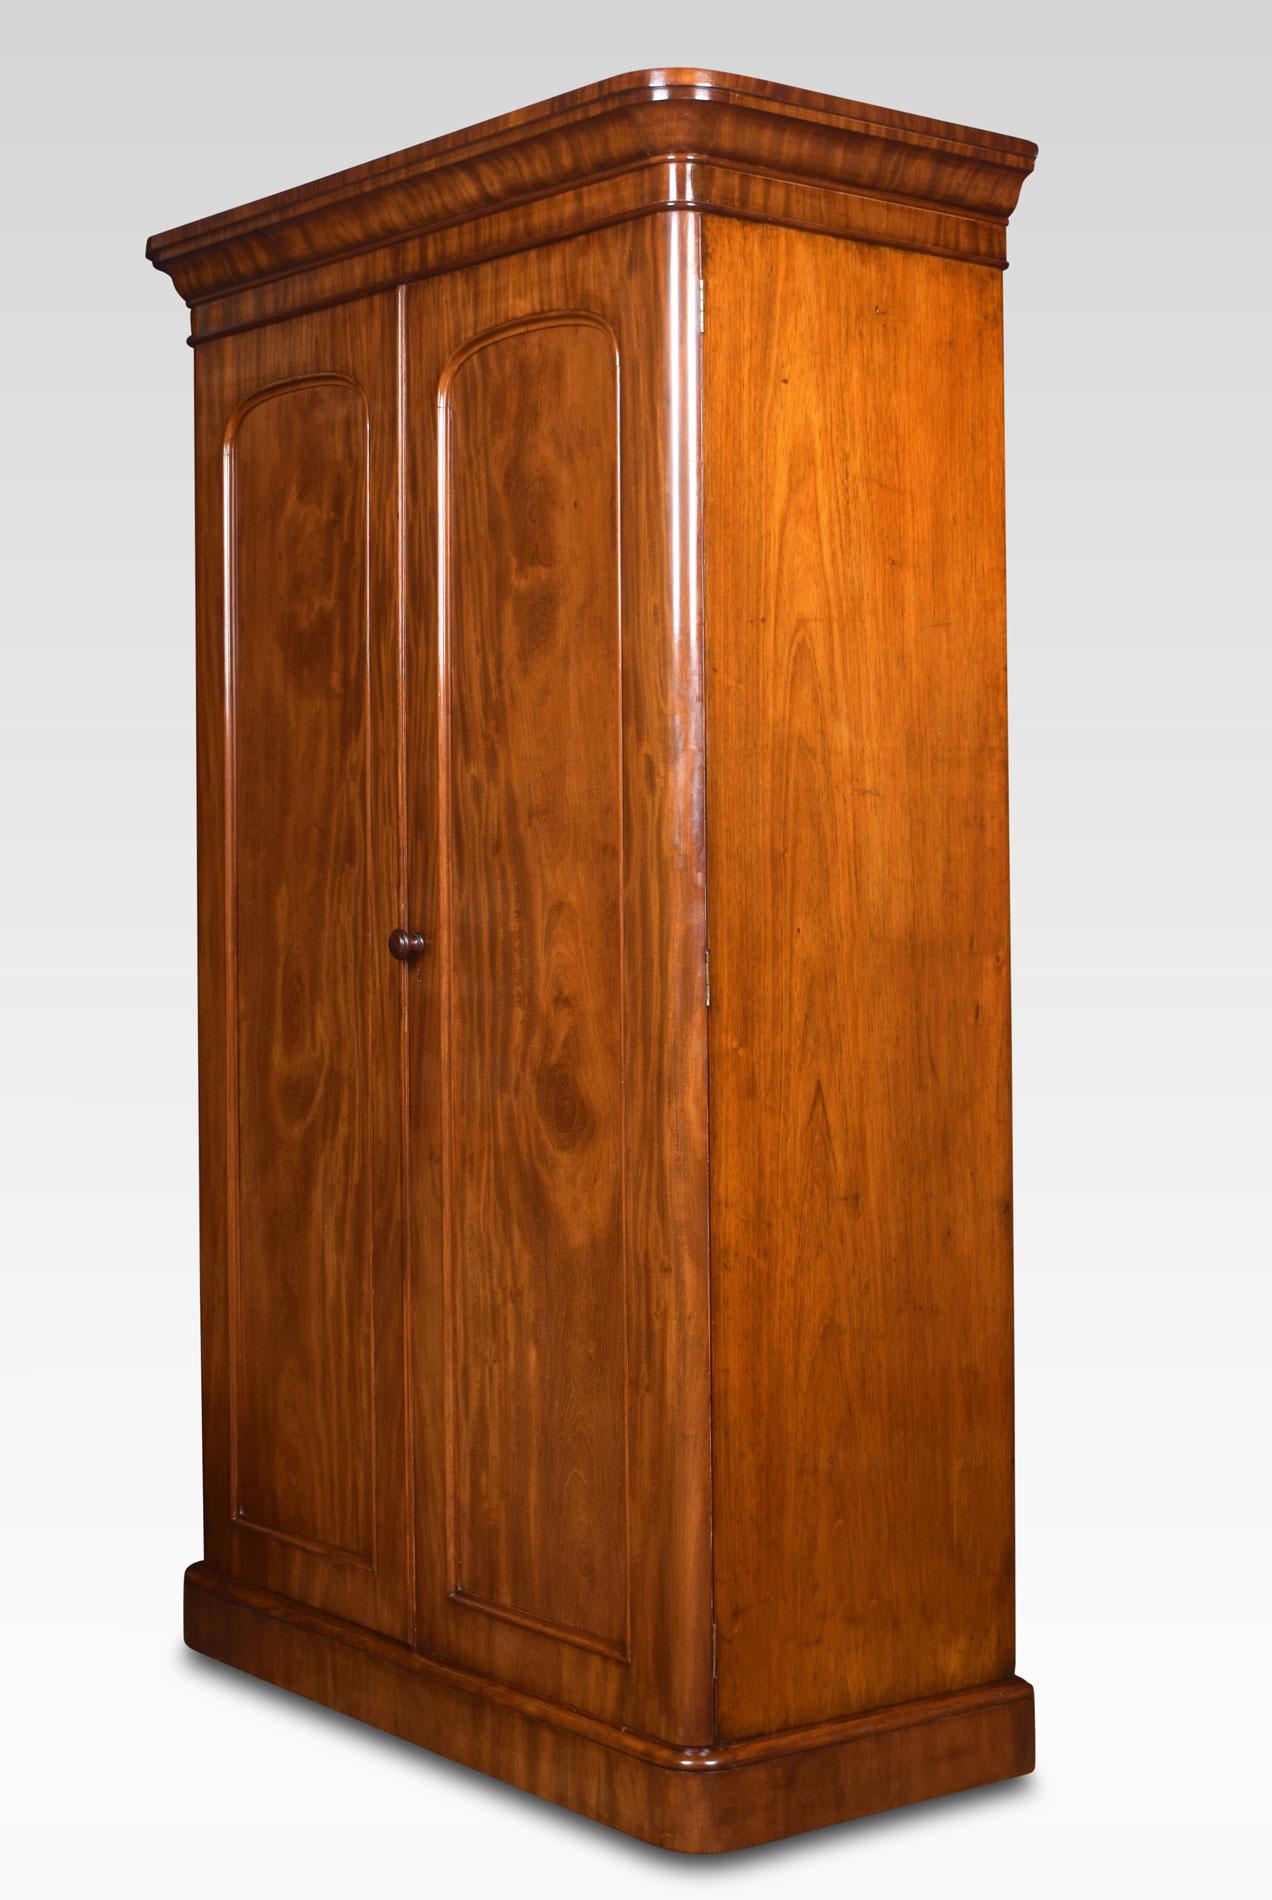 Mahogany two-door wardrobe the projected carved moulded cornice, over two arched doors opening to reveal hanging area, slides and drawers. All raised up on plinth base.
Dimensions:
Height 81.5 inches
Length 51 inches
width 23.5 inches.